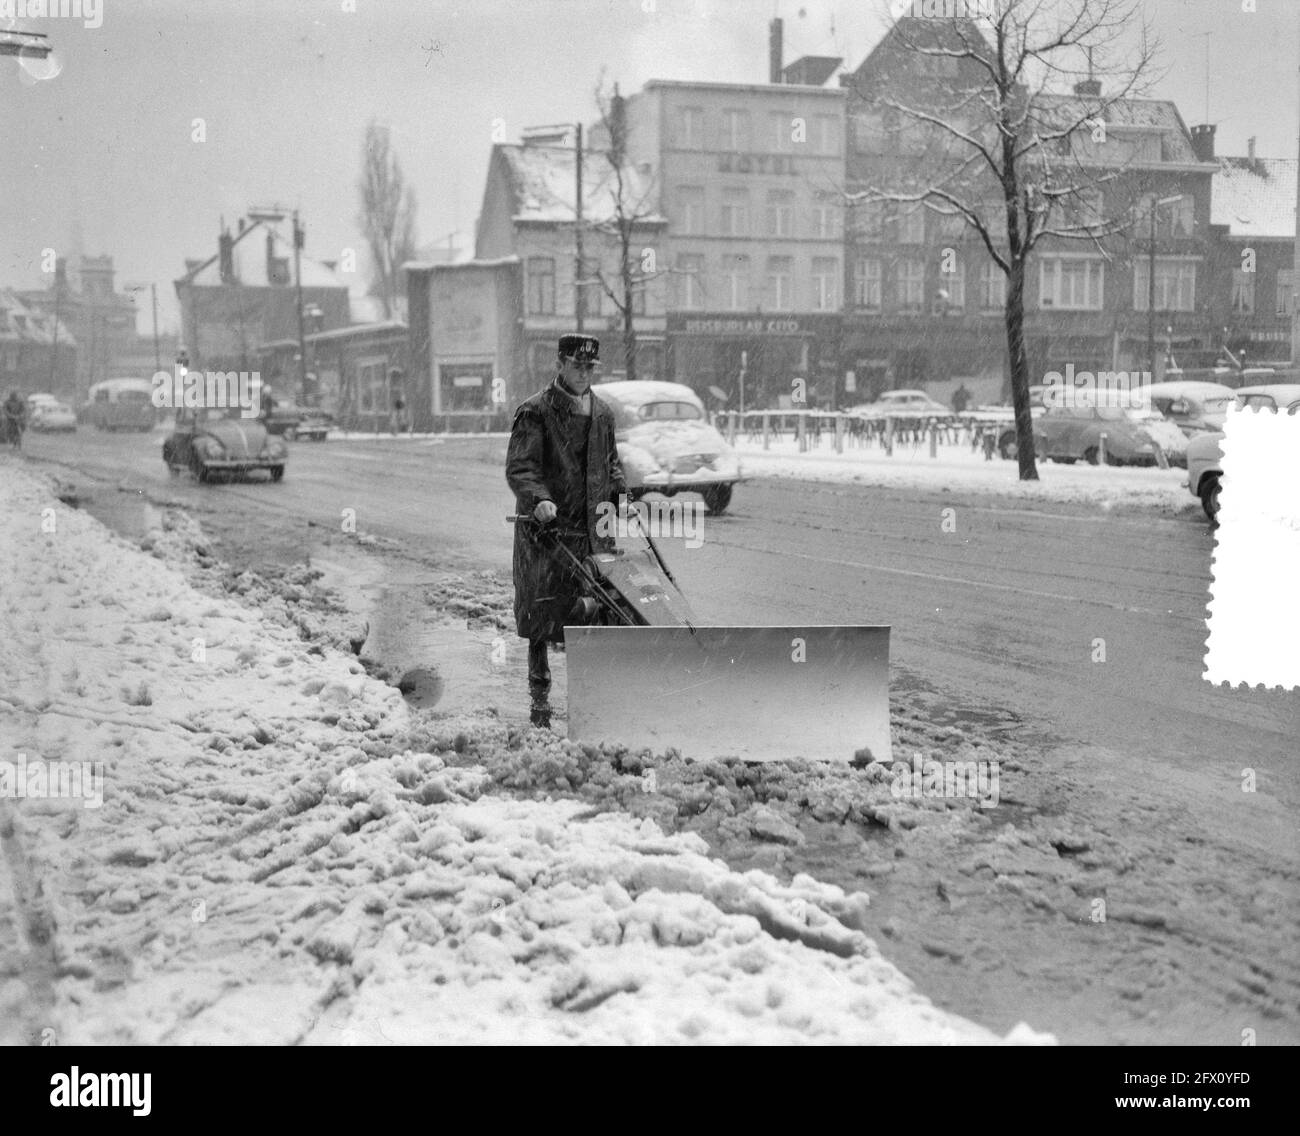 Heavy snowfall in Eindhoven, February 20, 1957, snowfall, The Netherlands, 20th century press agency photo, news to remember, documentary, historic photography 1945-1990, visual stories, human history of the Twentieth Century, capturing moments in time Stock Photo